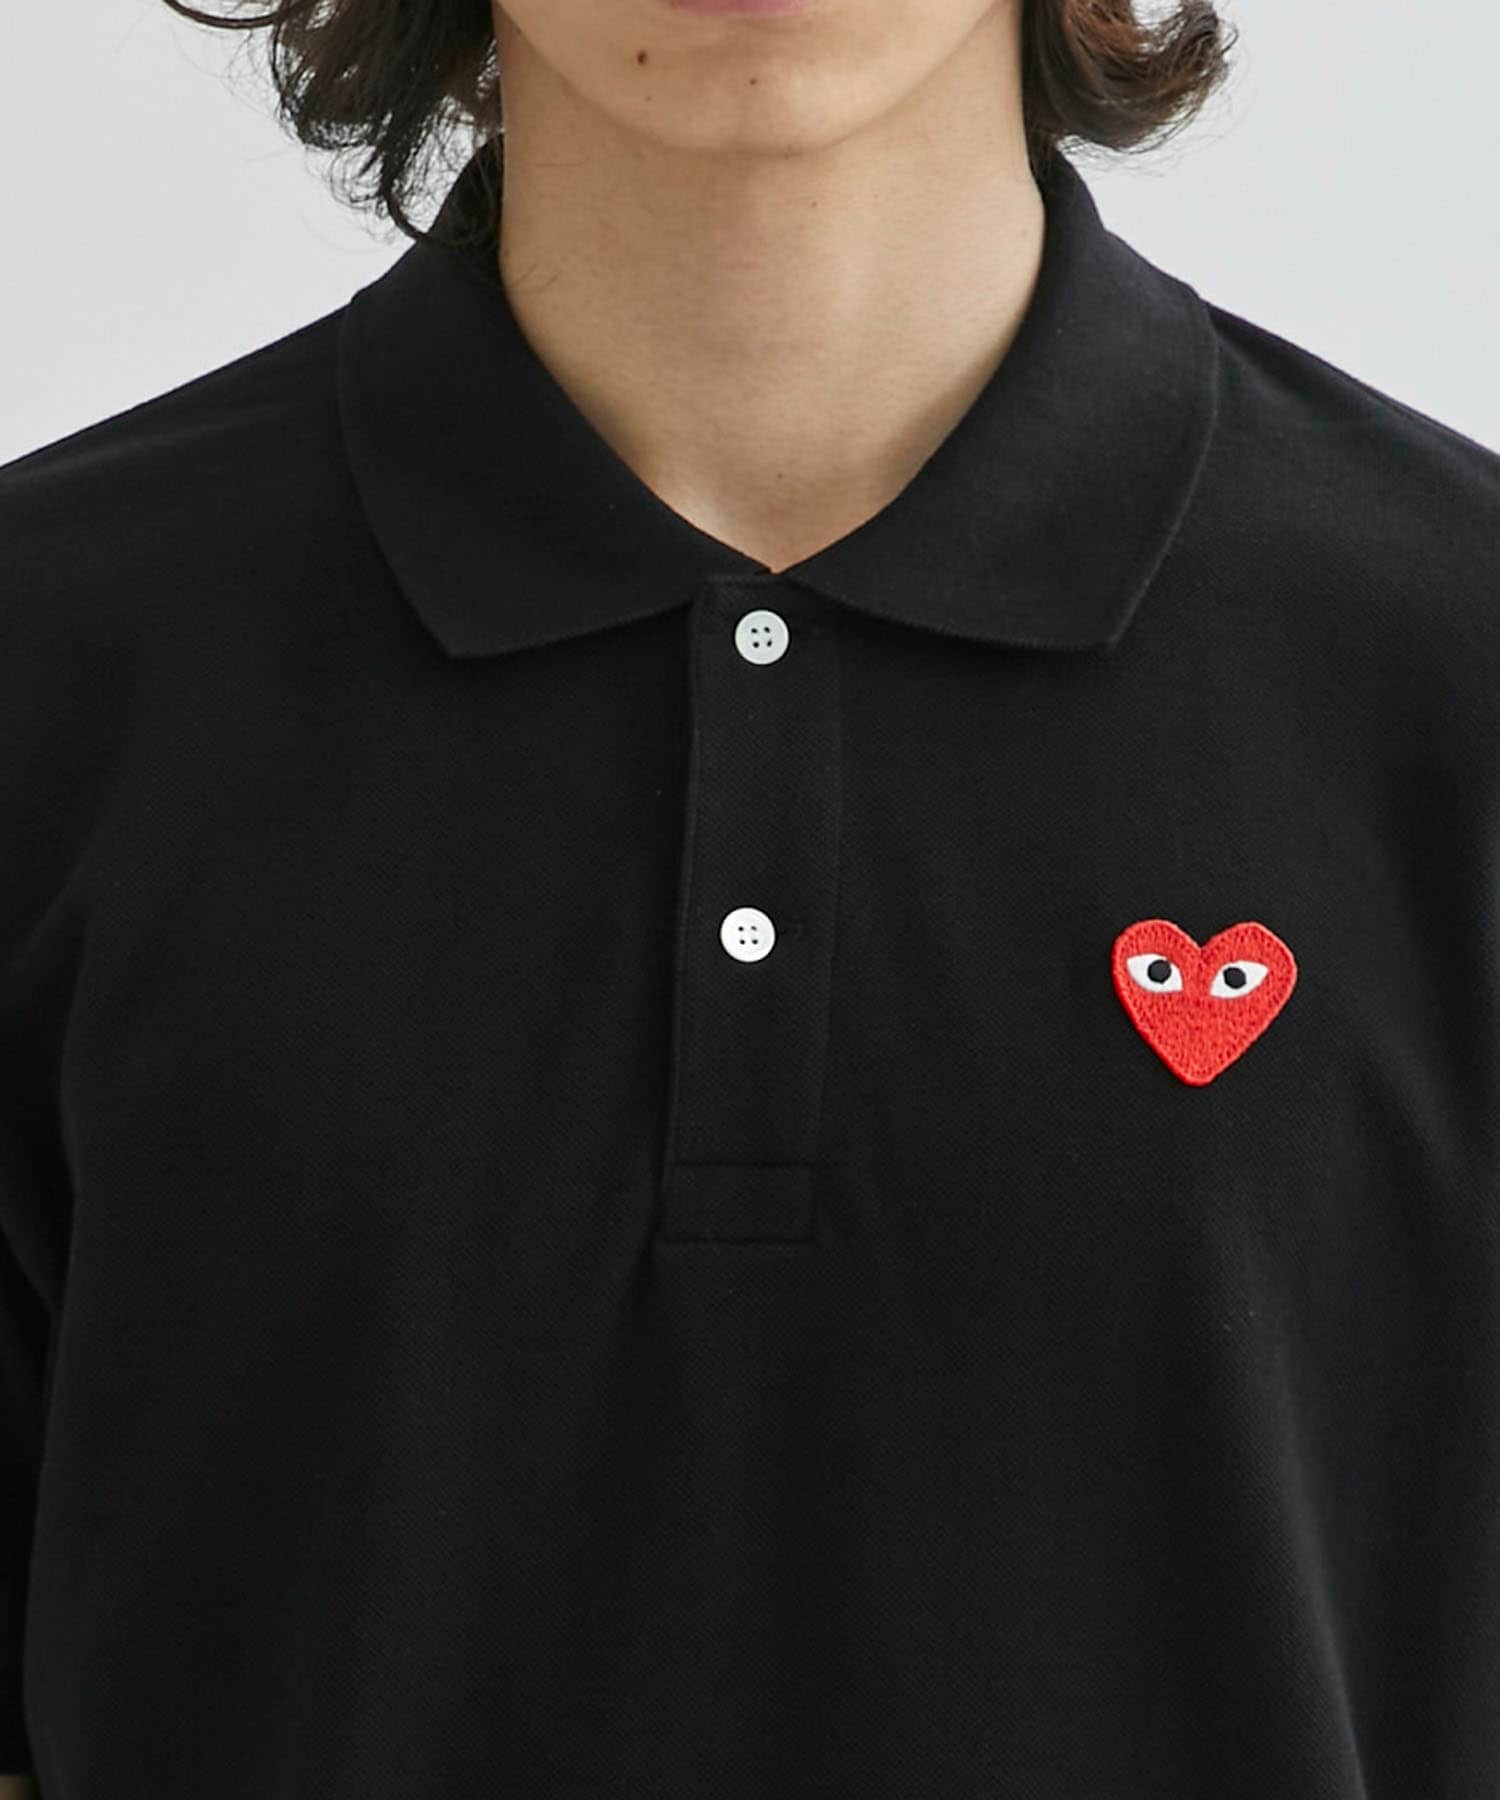 PLAY POLO SHIRT PLAY COMME des GARCONS